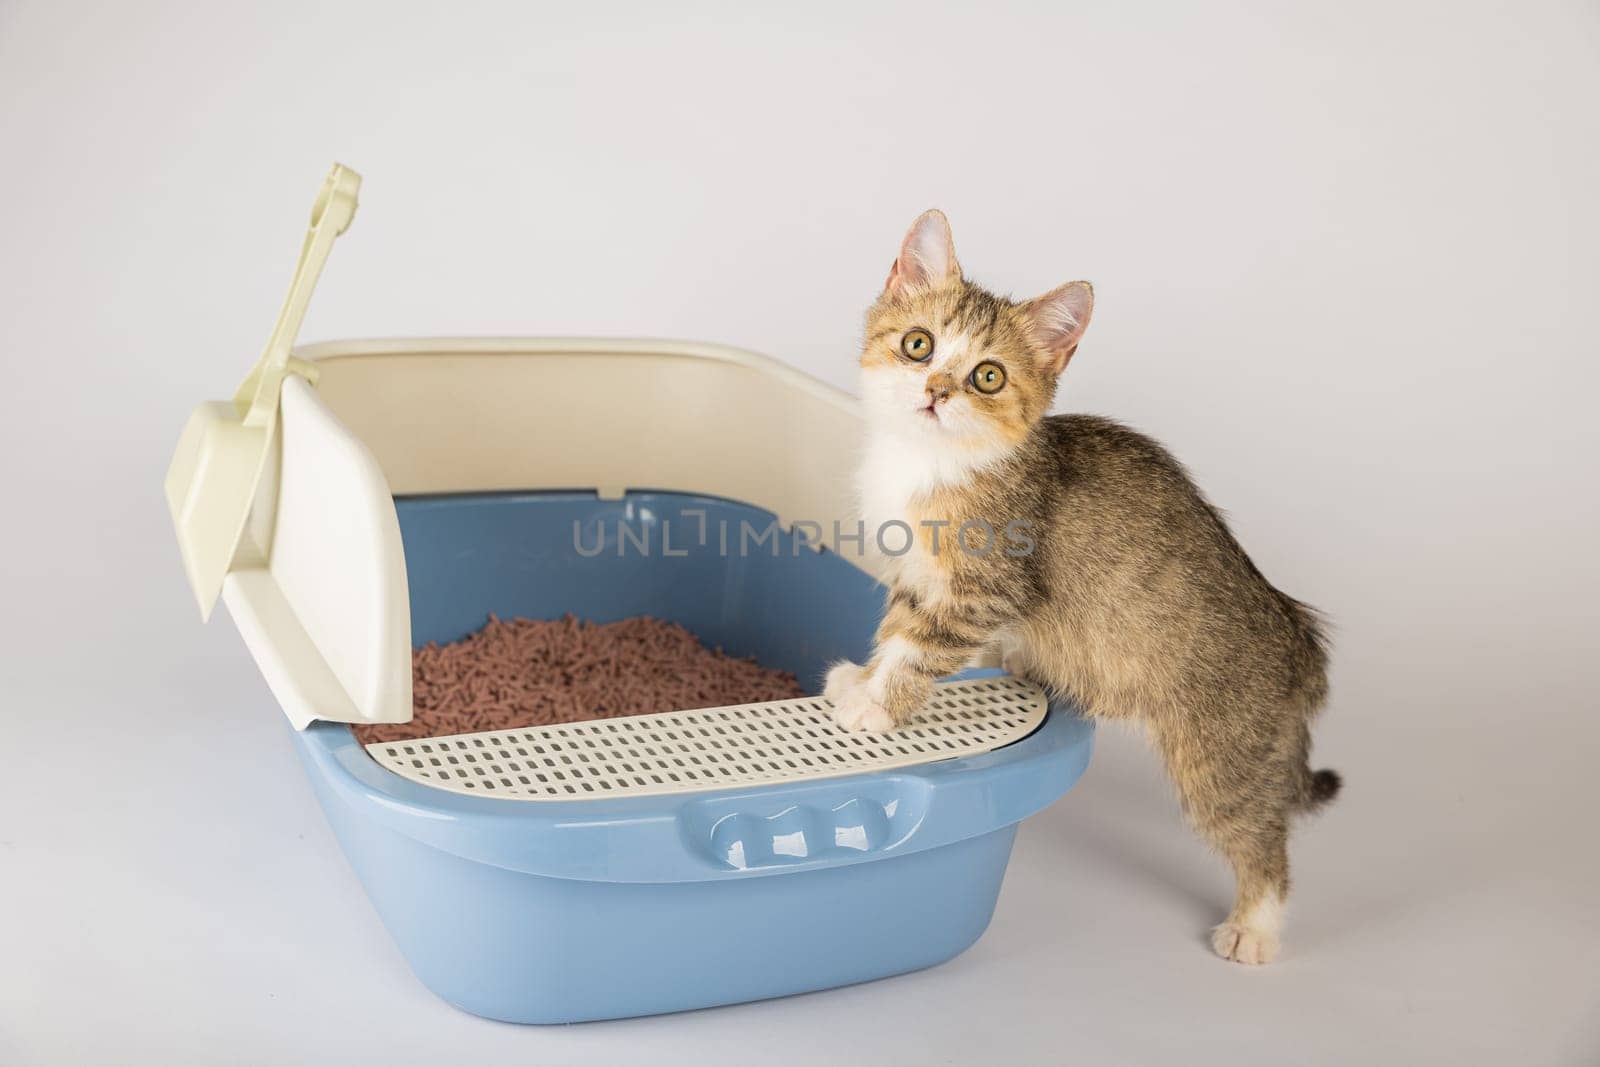 Isolated image showcases a cat in a litter box underscoring the significance of animal care and hygiene. The designated cat tray serves as the feline's toilet in this clean controlled environment.